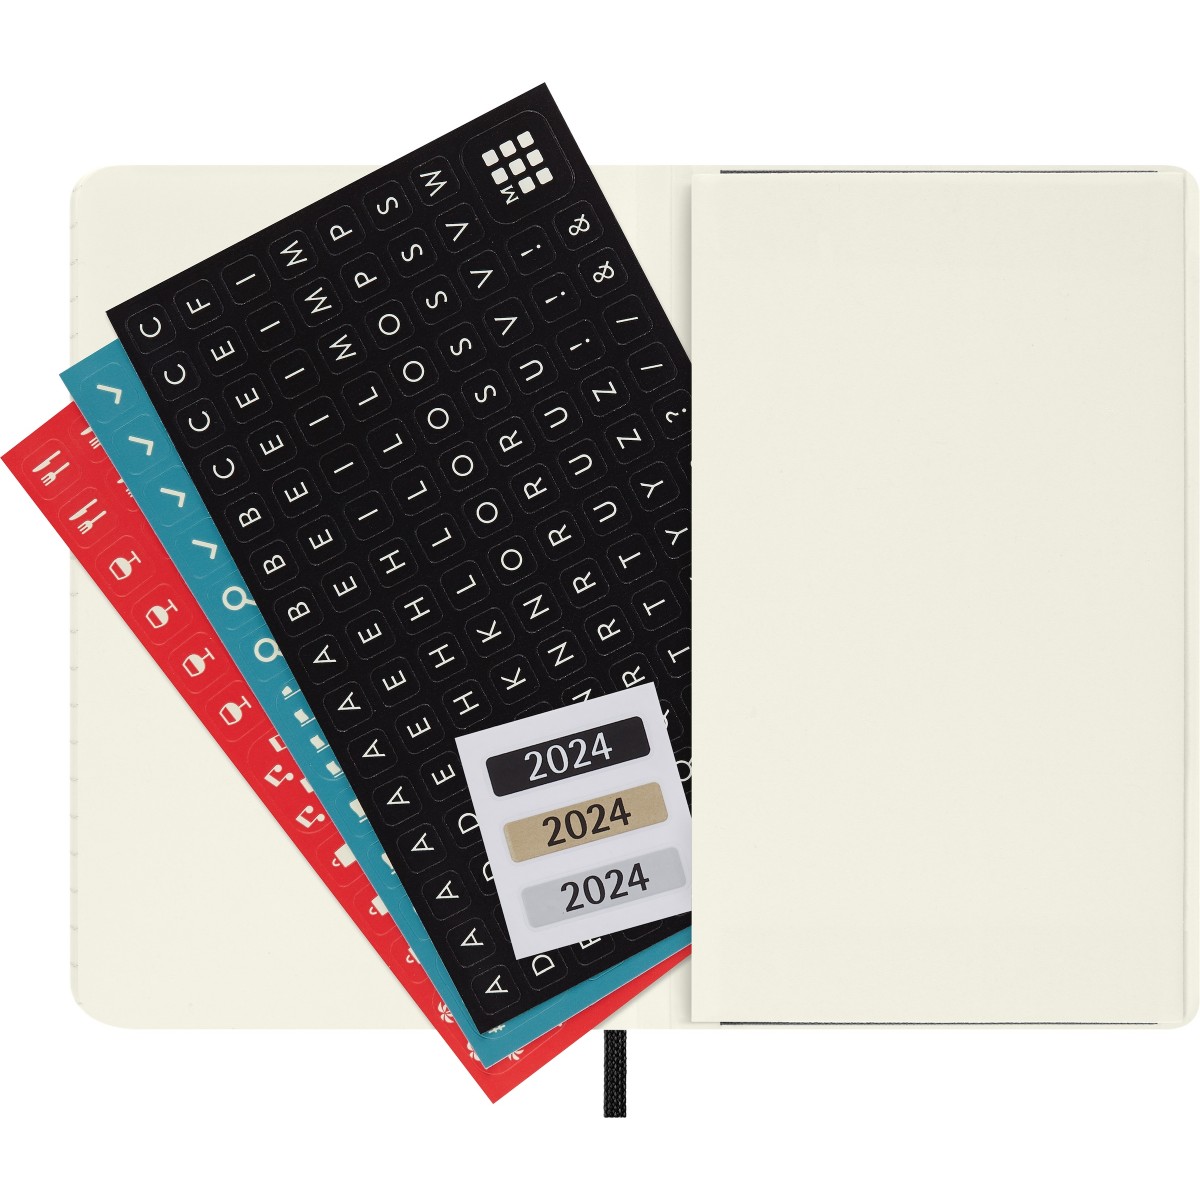 Moleskine 2024 Diary - Weekly Planner (XL) - The Deckle Edge